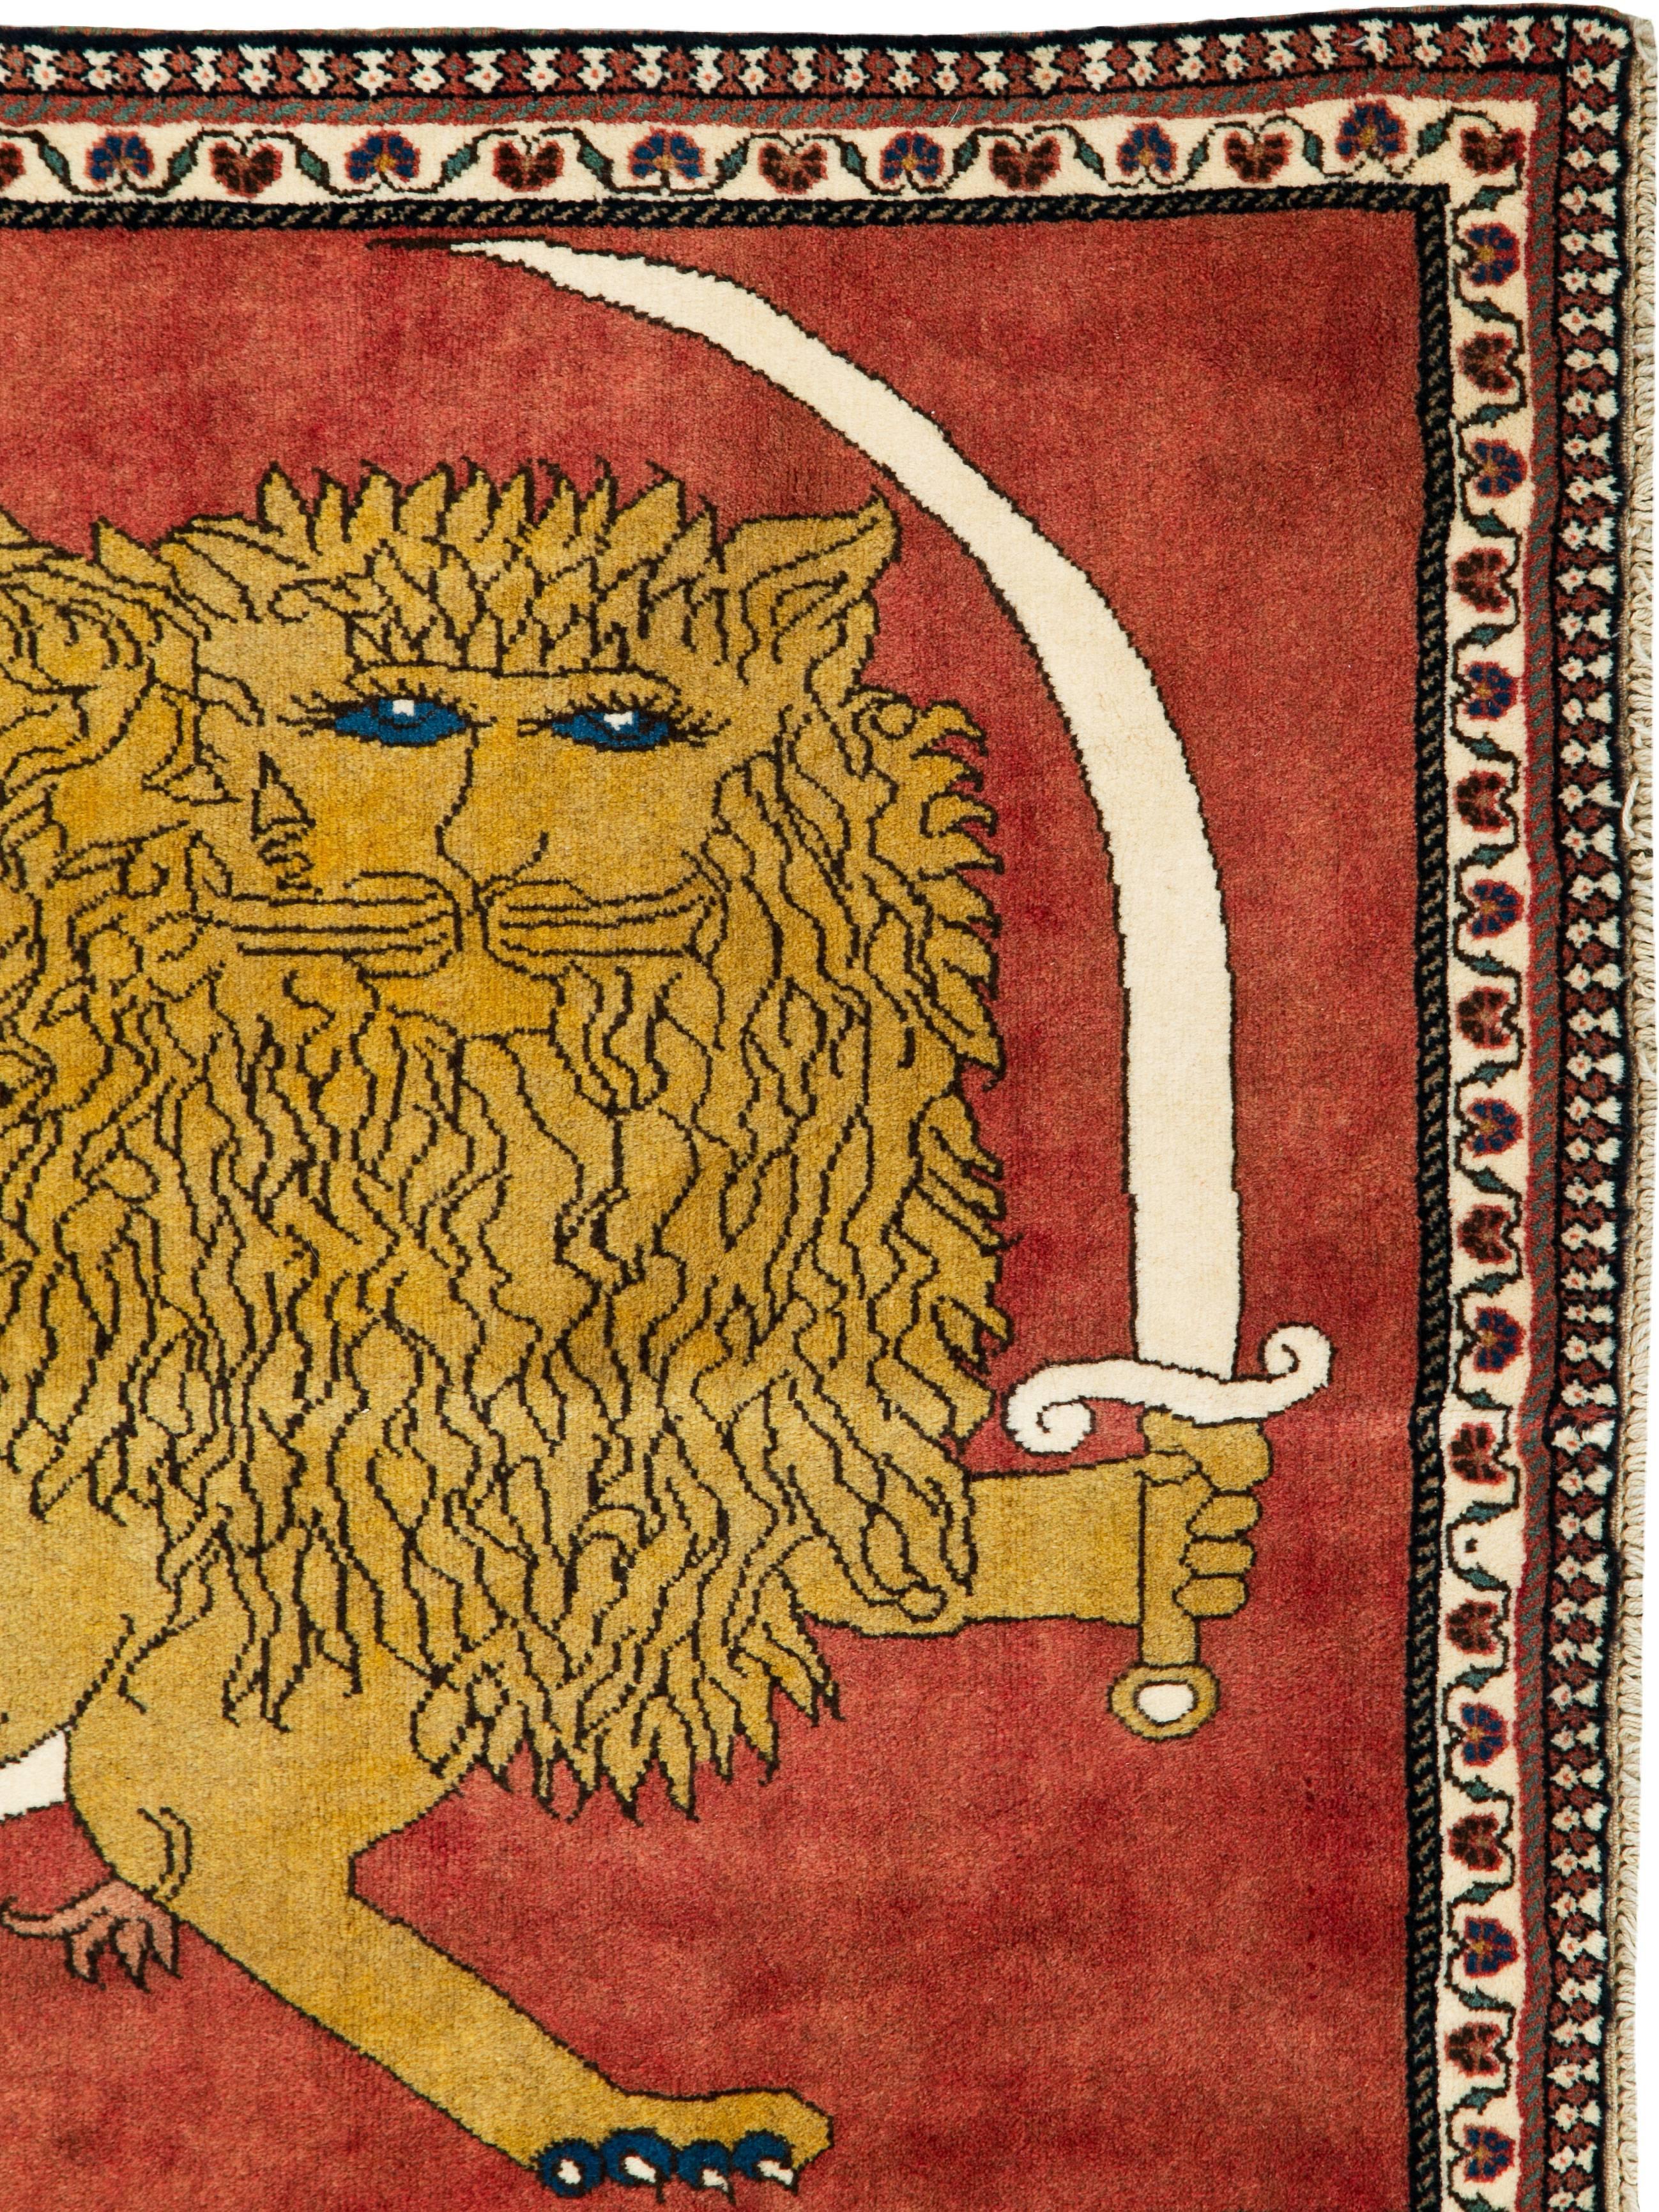 A vintage Persian Shiraz rug from the late 20th century displaying the lion and sun symbol.